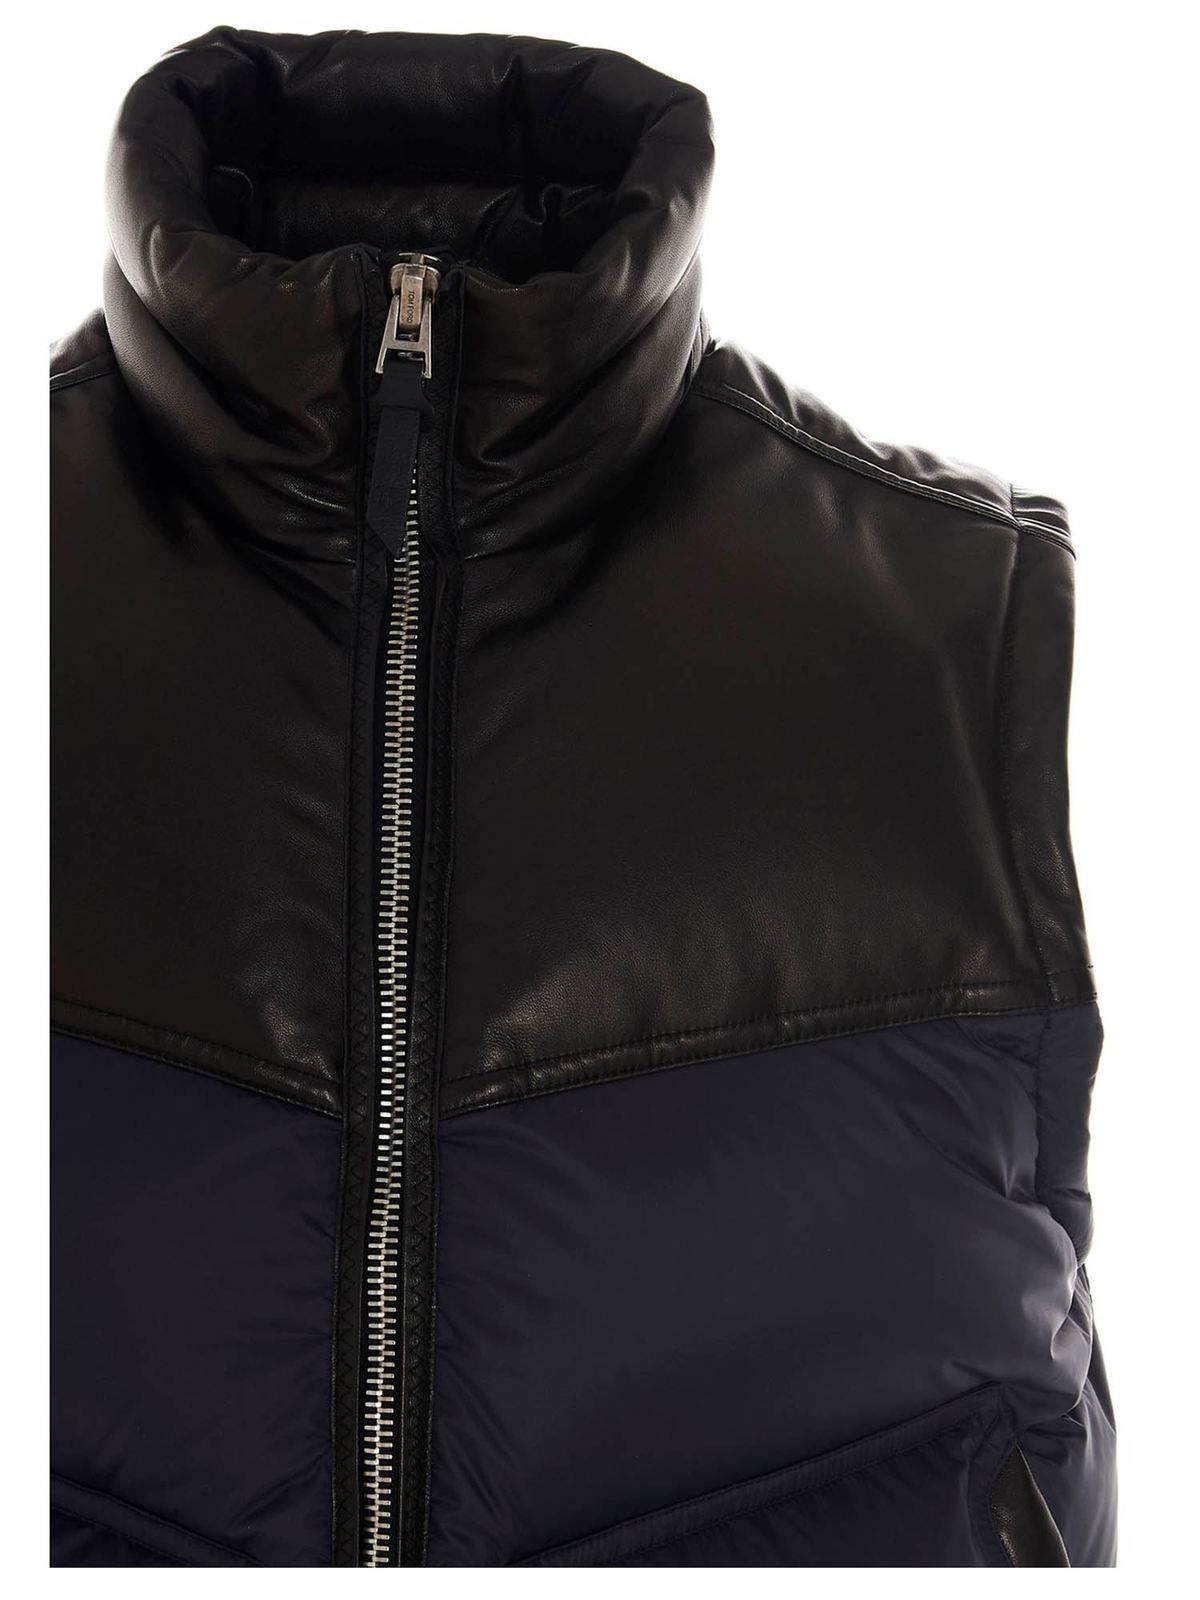 tom ford puffer jacket